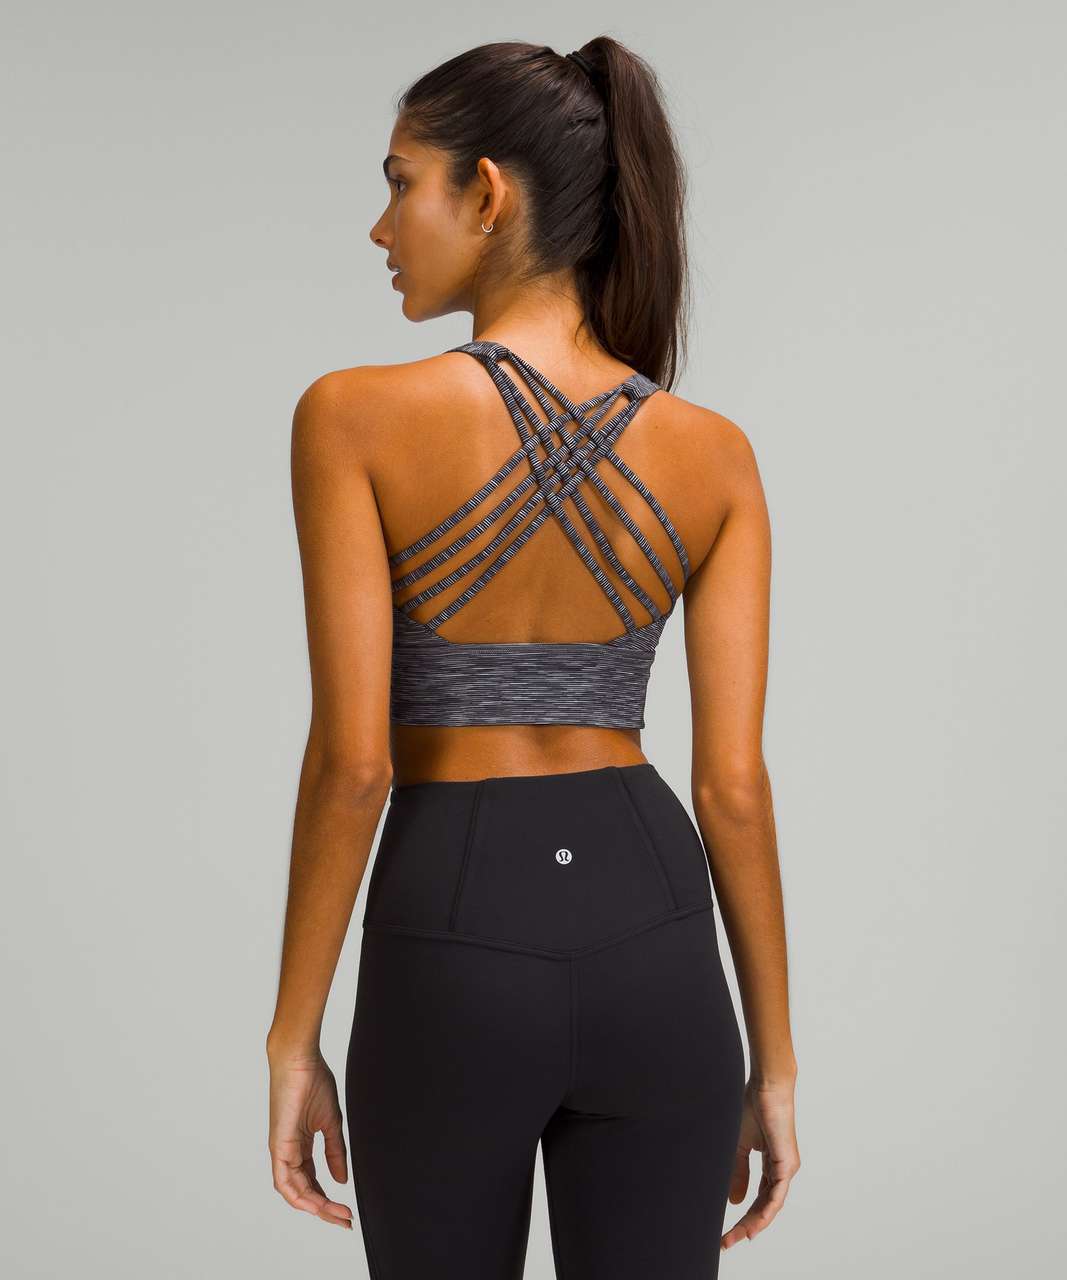 Lululemon Free to Be Longline Bra - Wild *Light Support, A/B Cup - Wee Are From Space Dark Carbon Ice Grey